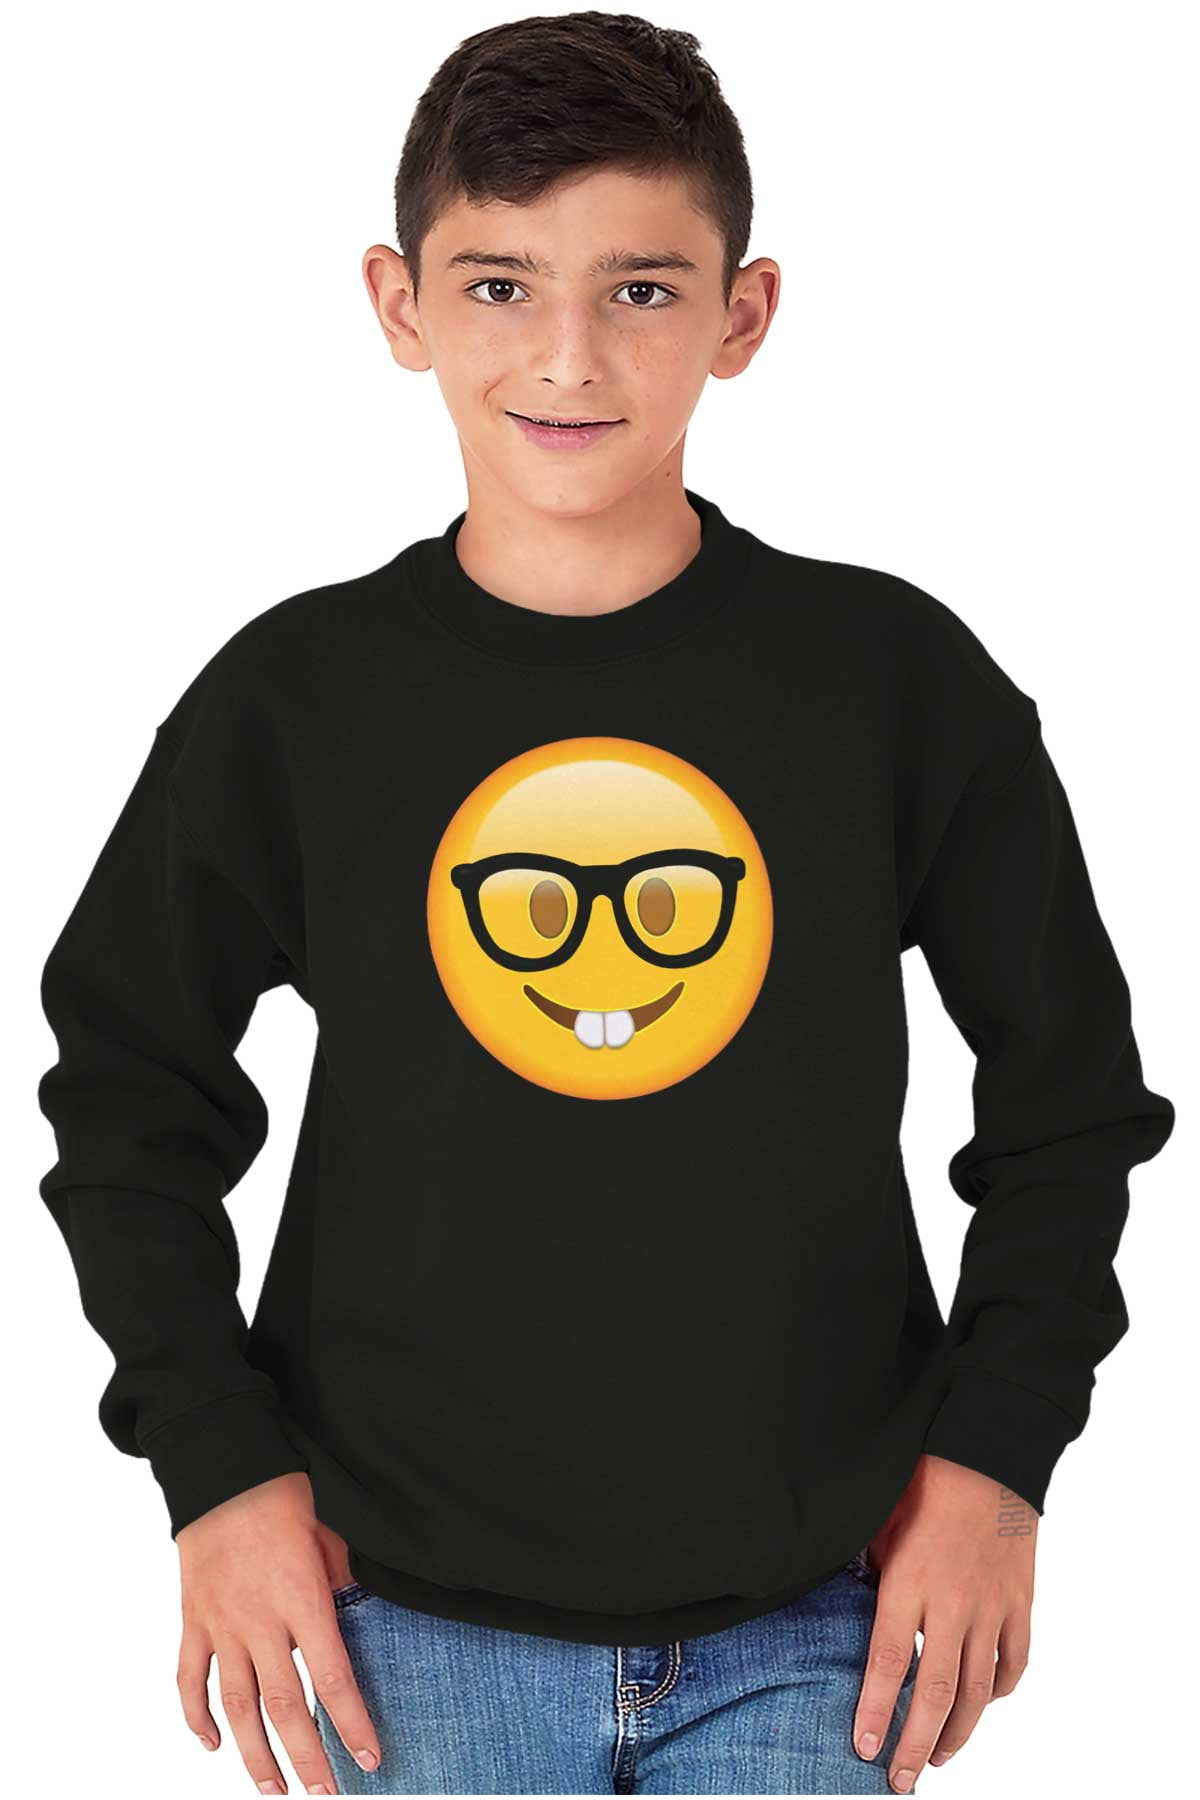 Go All Out Youth I Just Cant Funny Crewneck Sweatshirt